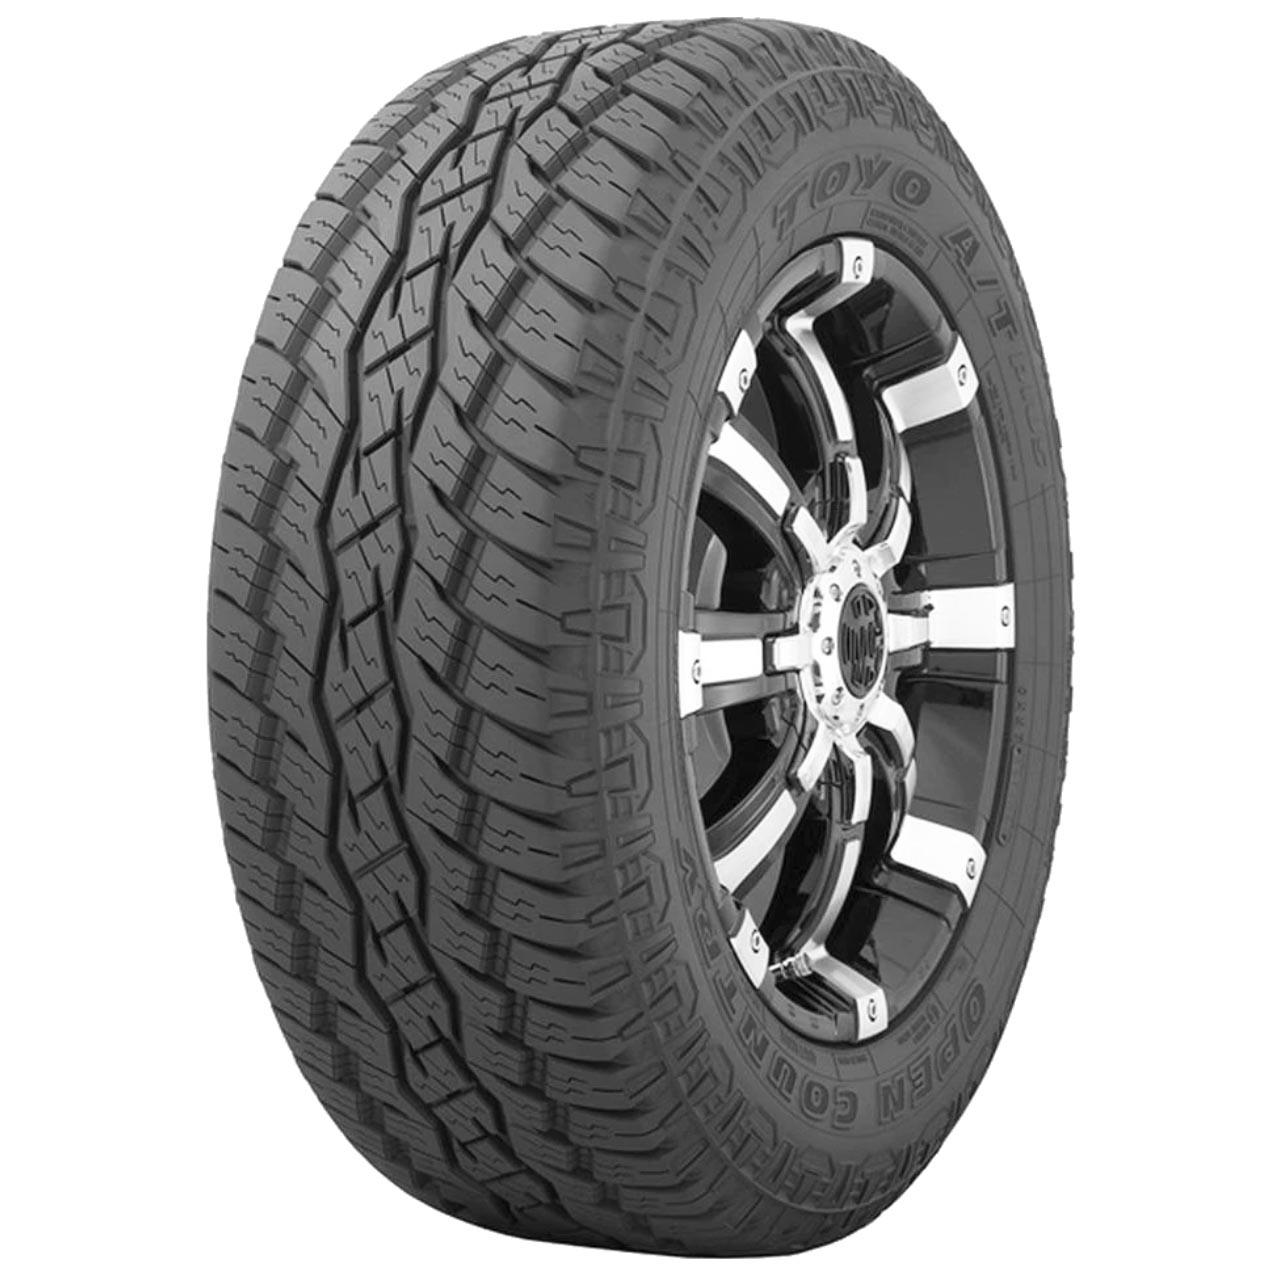 Toyo Open Country AT Plus 215/75R15 100T